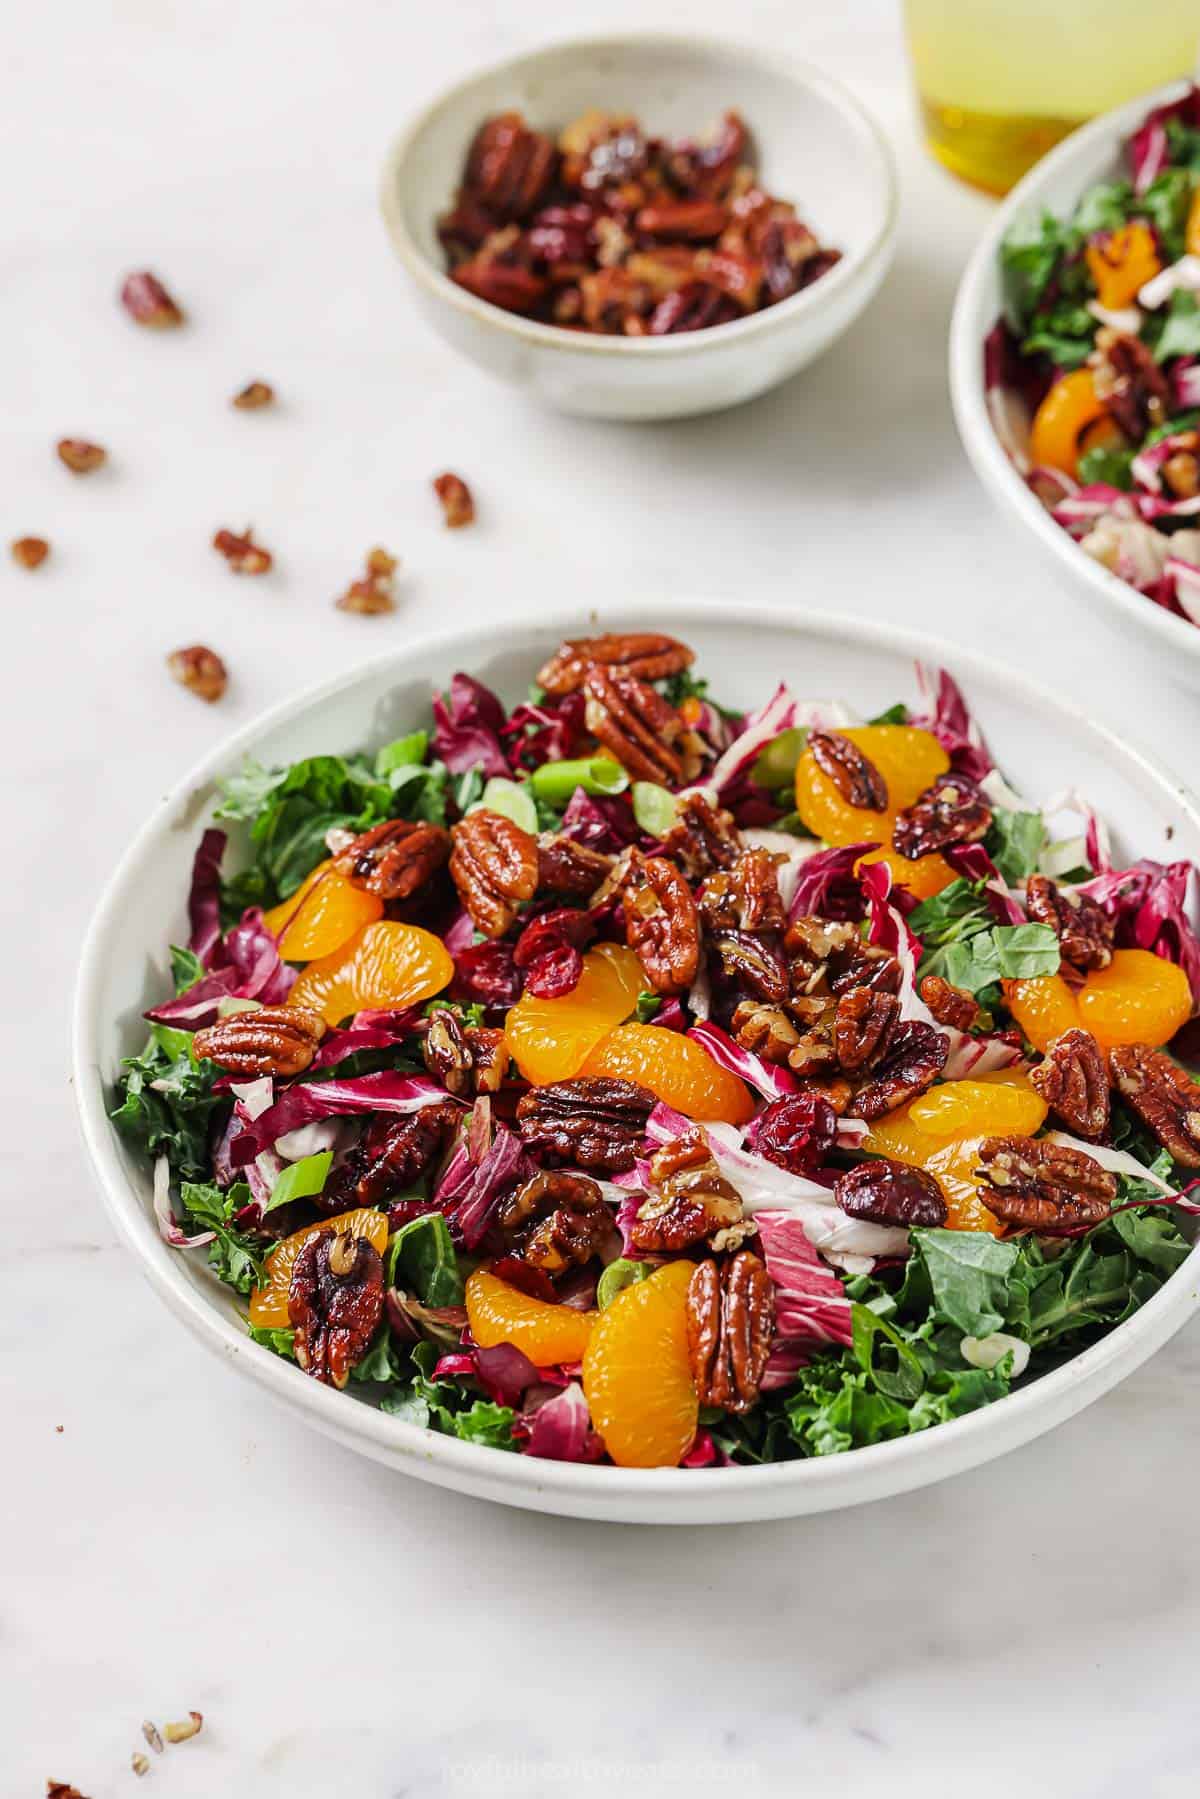 Bowl of kale salad with dressing and candied pecans.